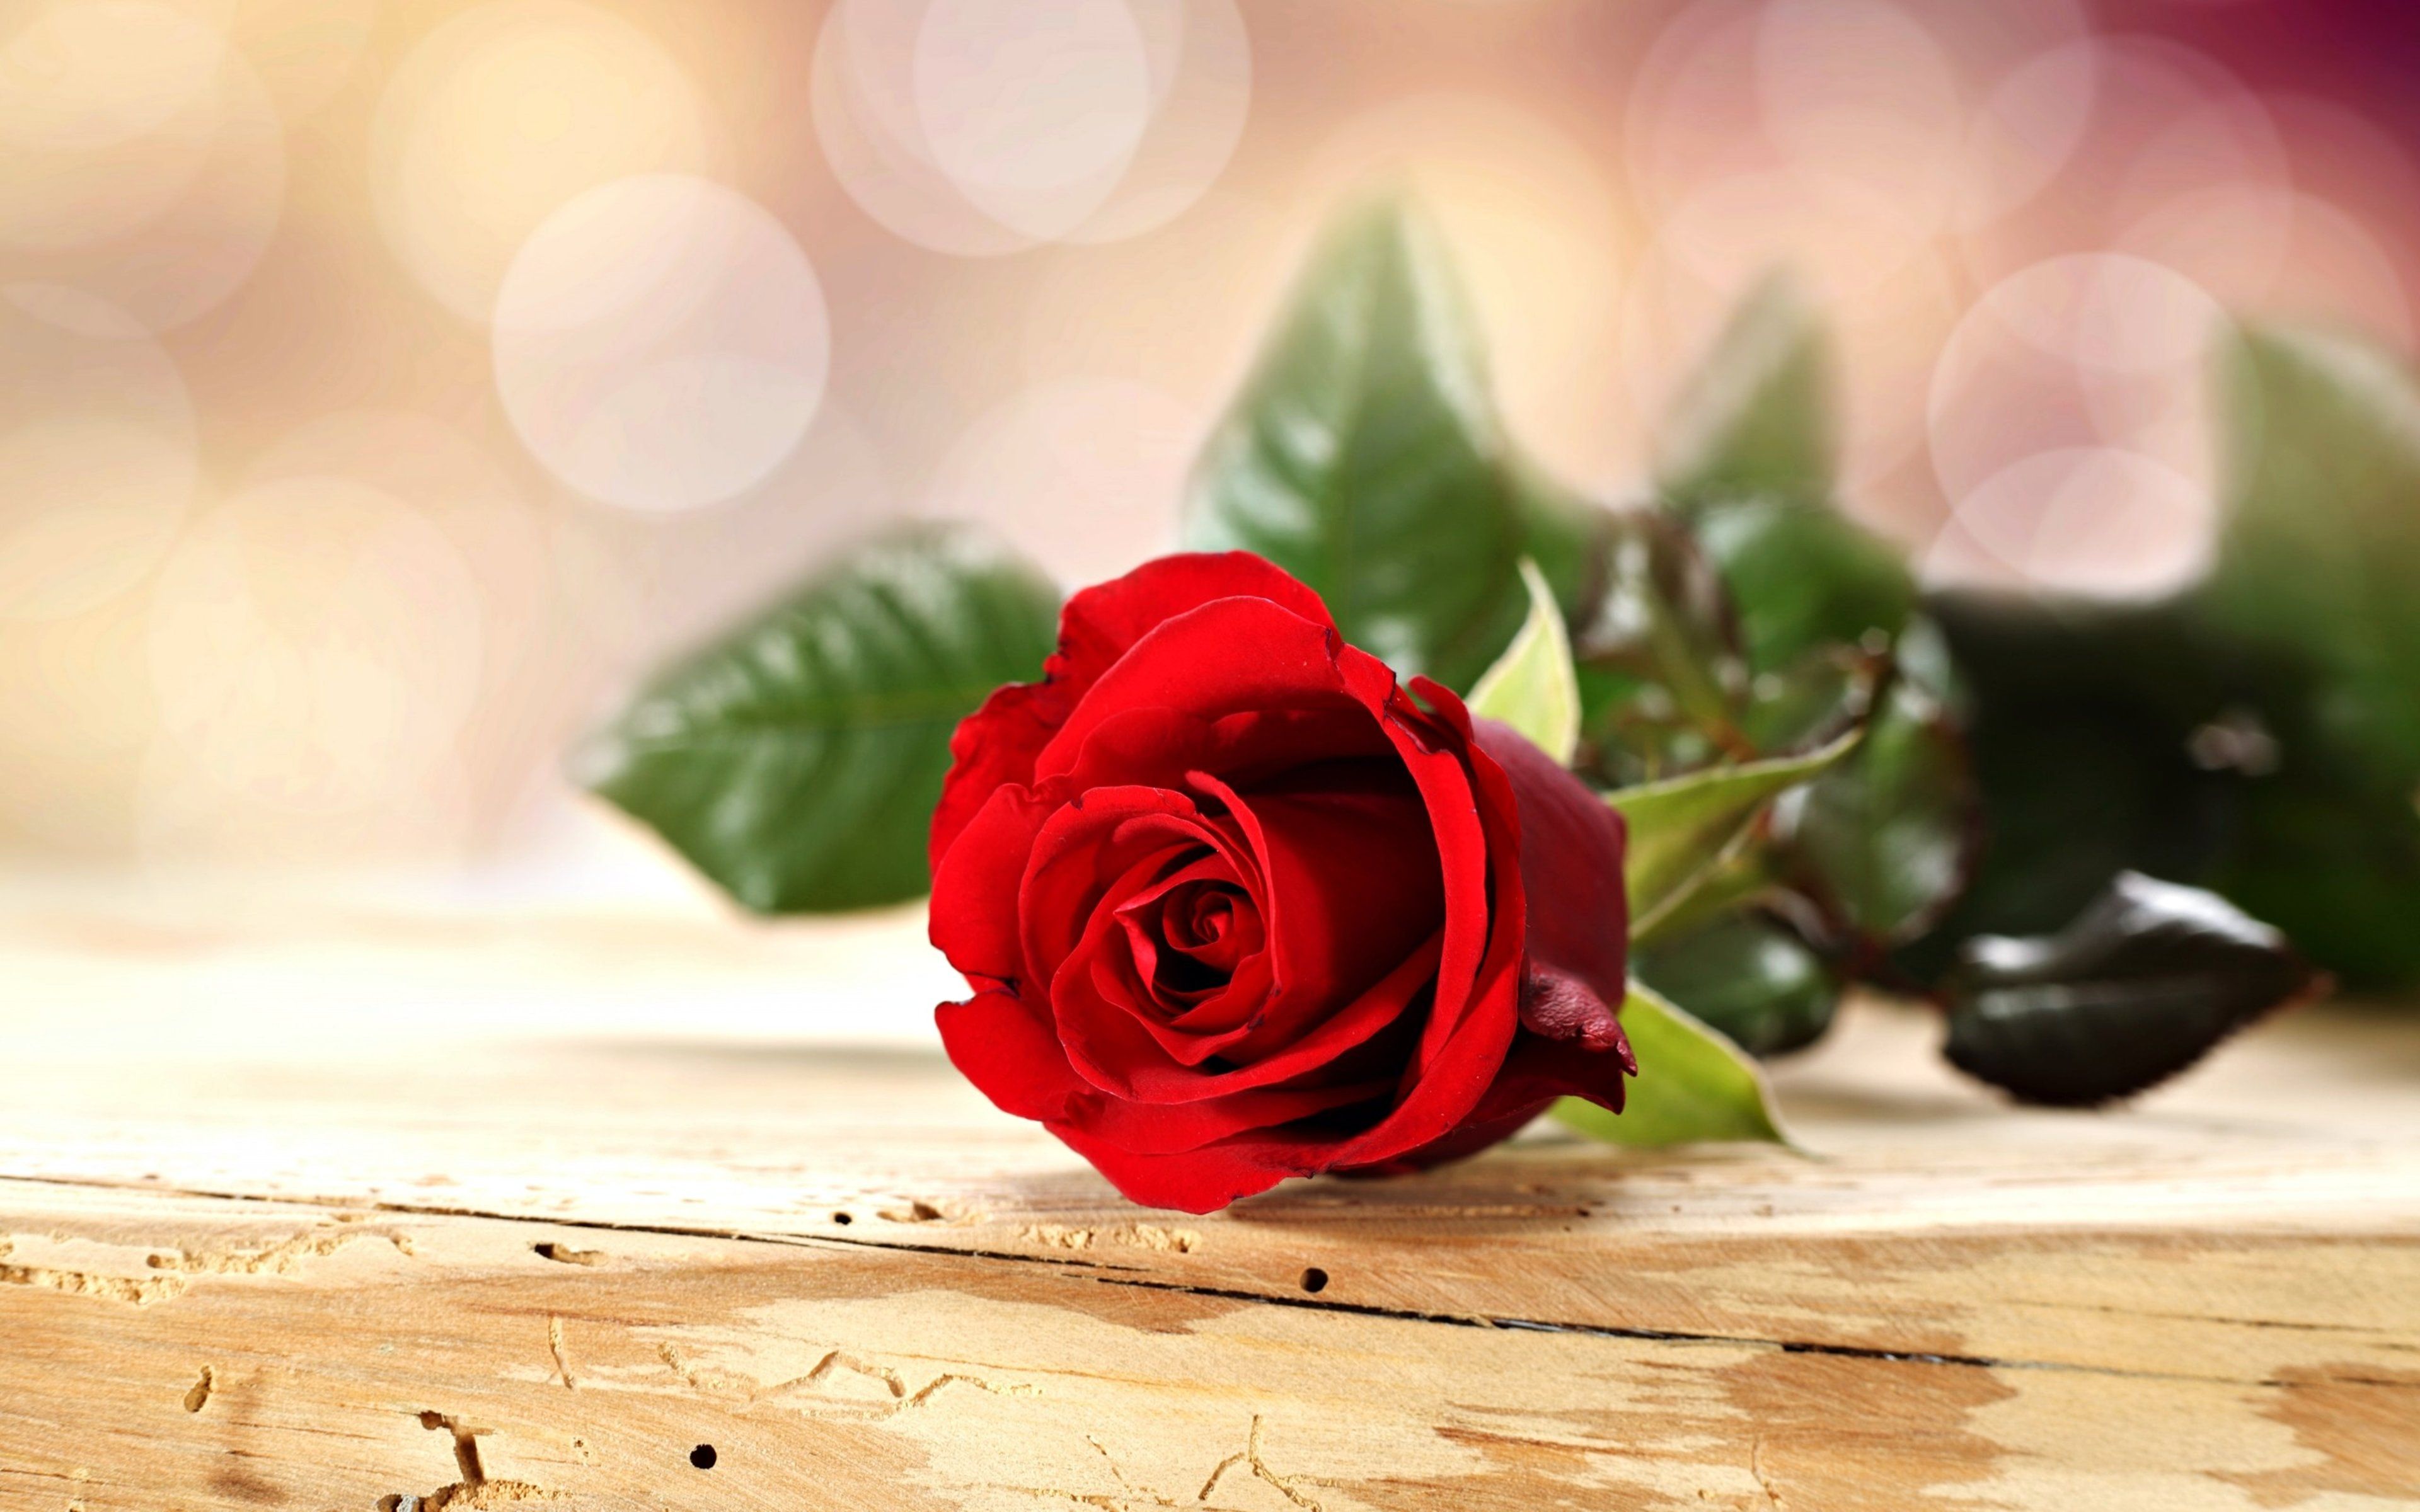 Wallpaper, 3840x2400 px, emotions, flowers, for, life, love, red, romance, rose, spring 3840x2400